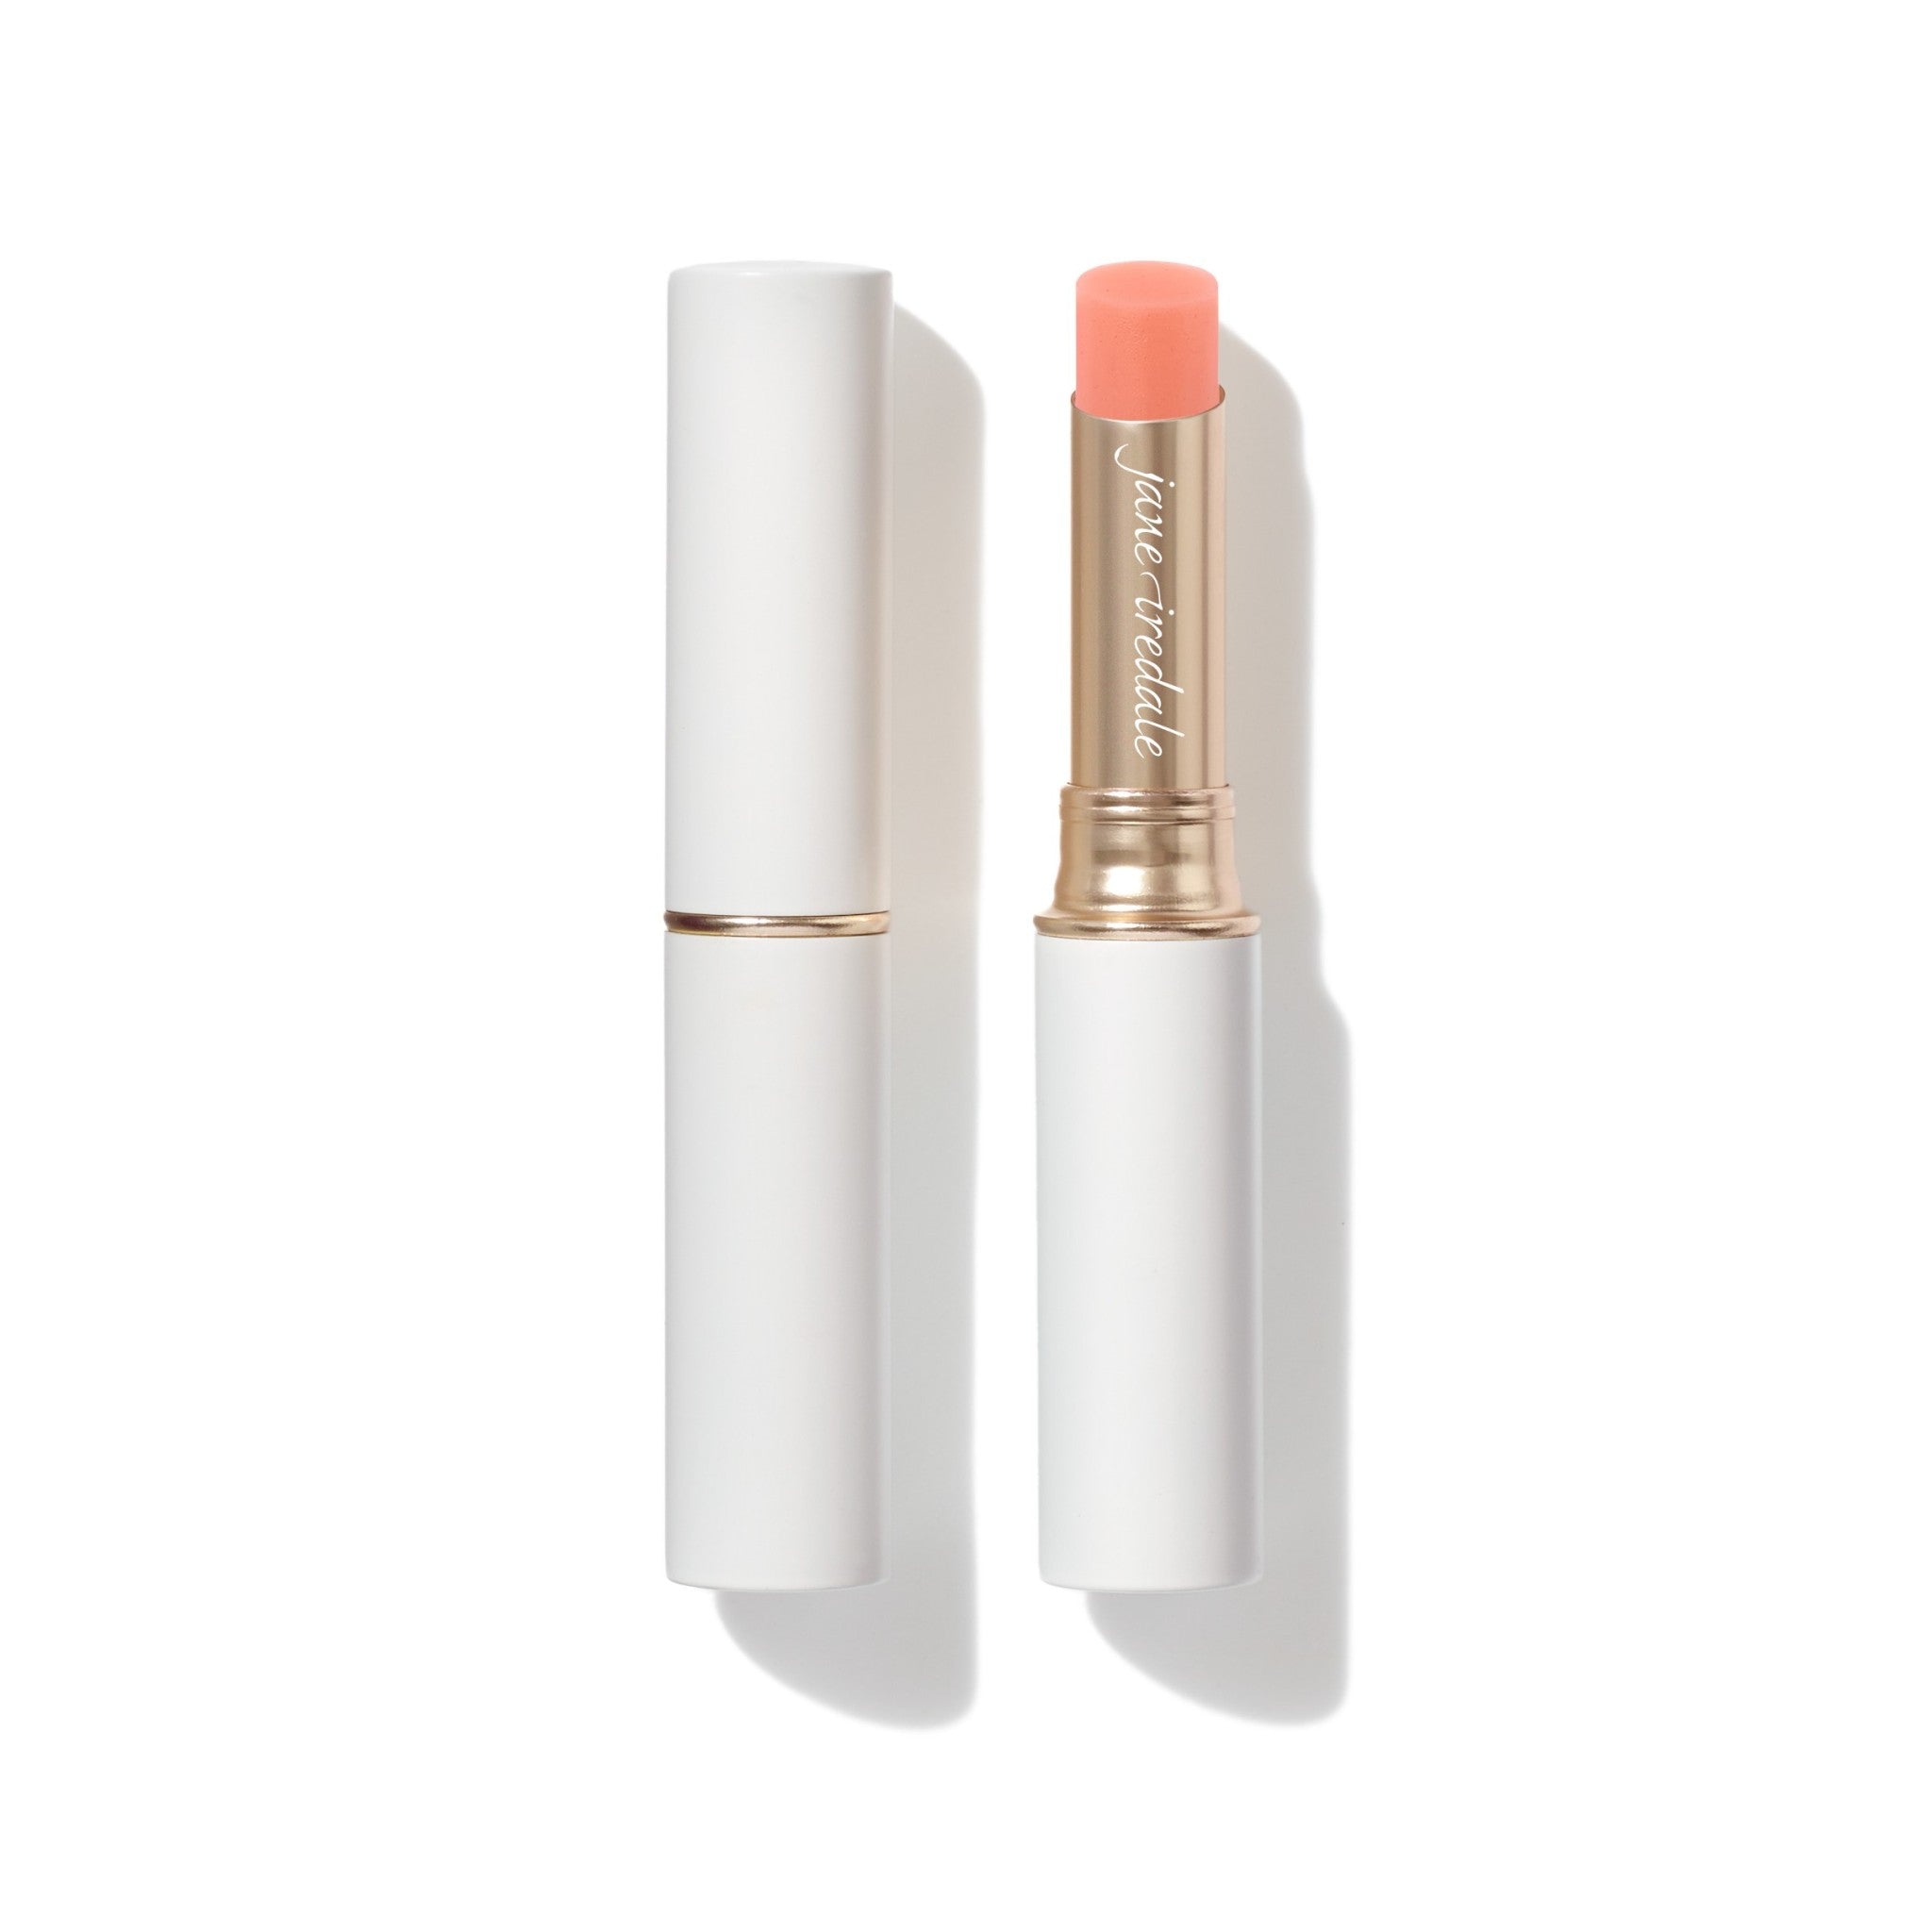 Jane Iredale Just Kissed Lip and Cheek Stain Color/Shade variant: Forever Pink main image. This product is in the color coral